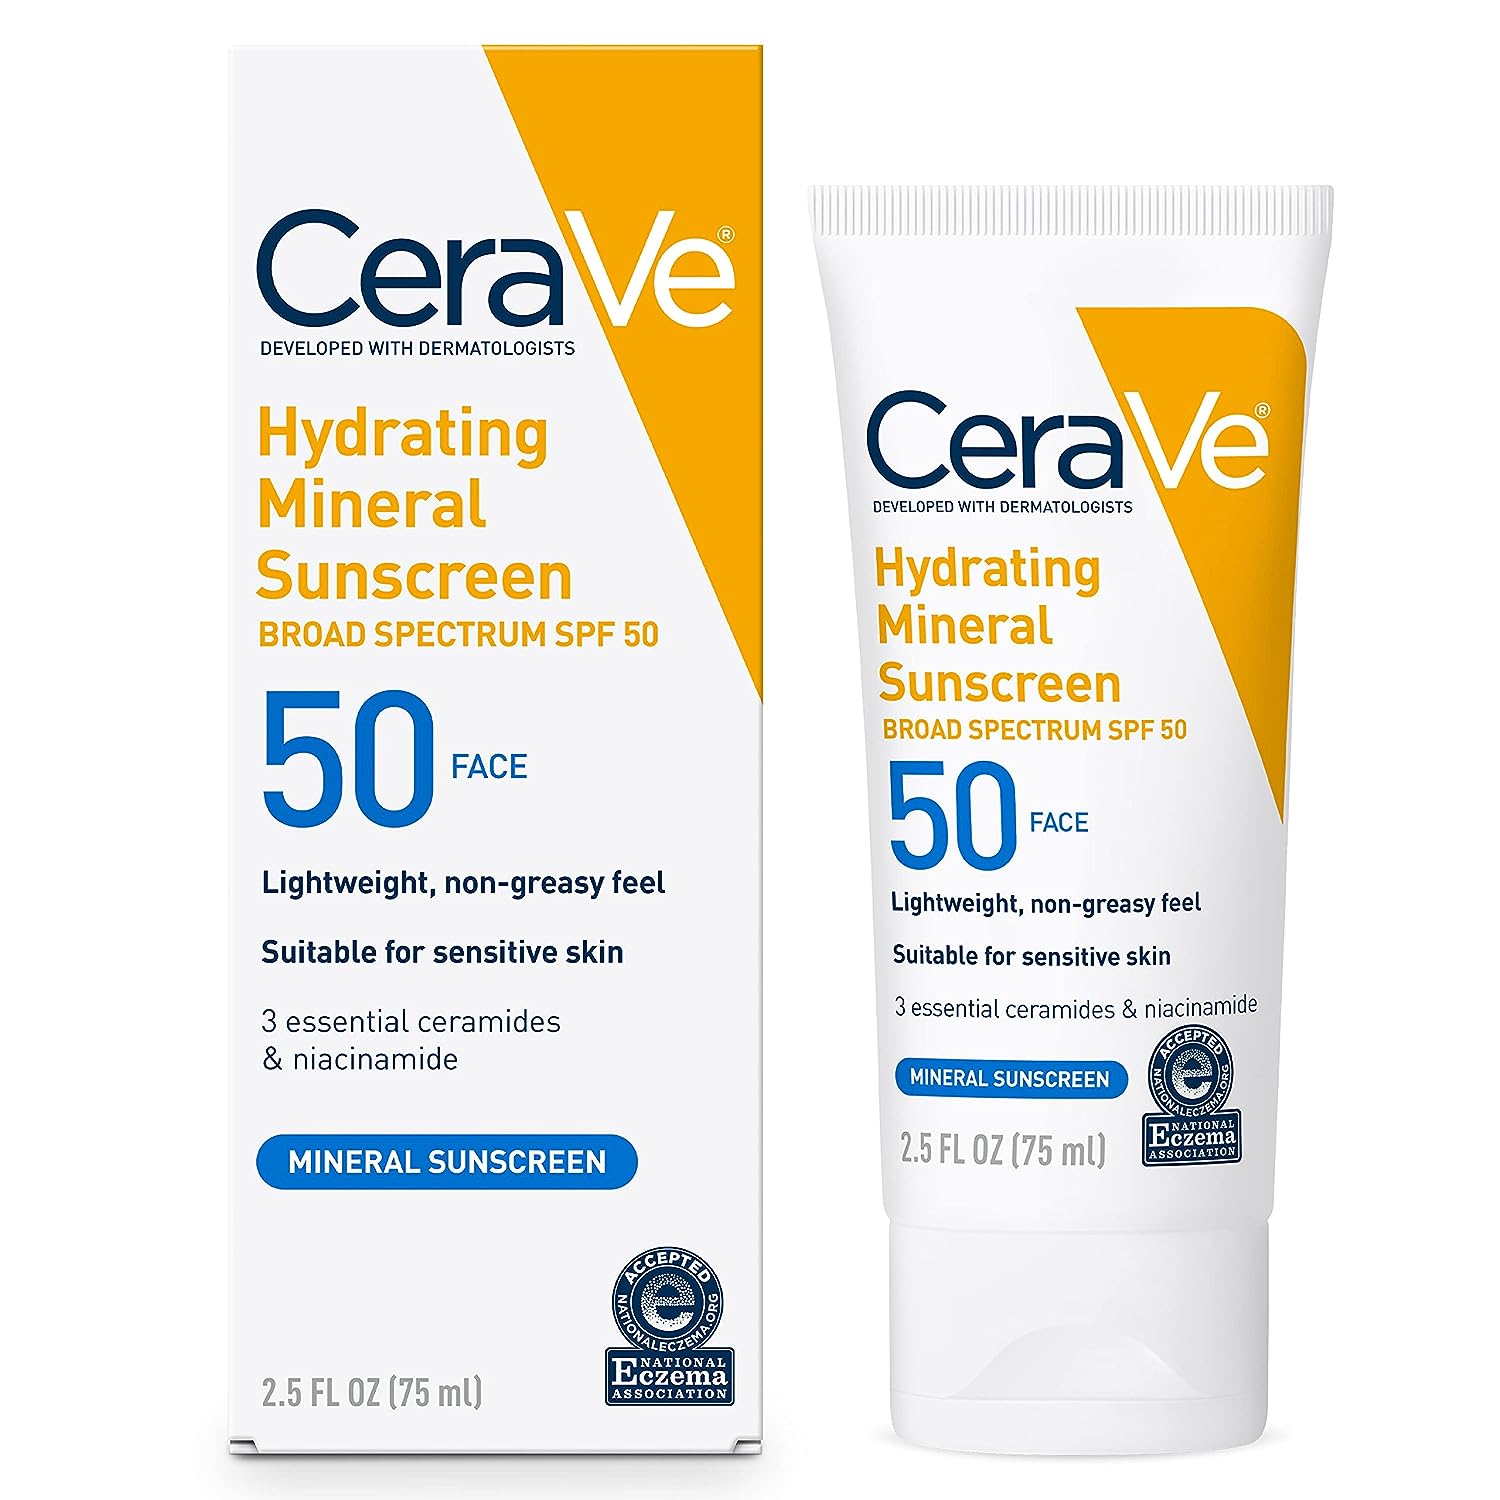 Hydrating Mineral Face Sunscreen Lotion SPF 50 with Zinc Oxide